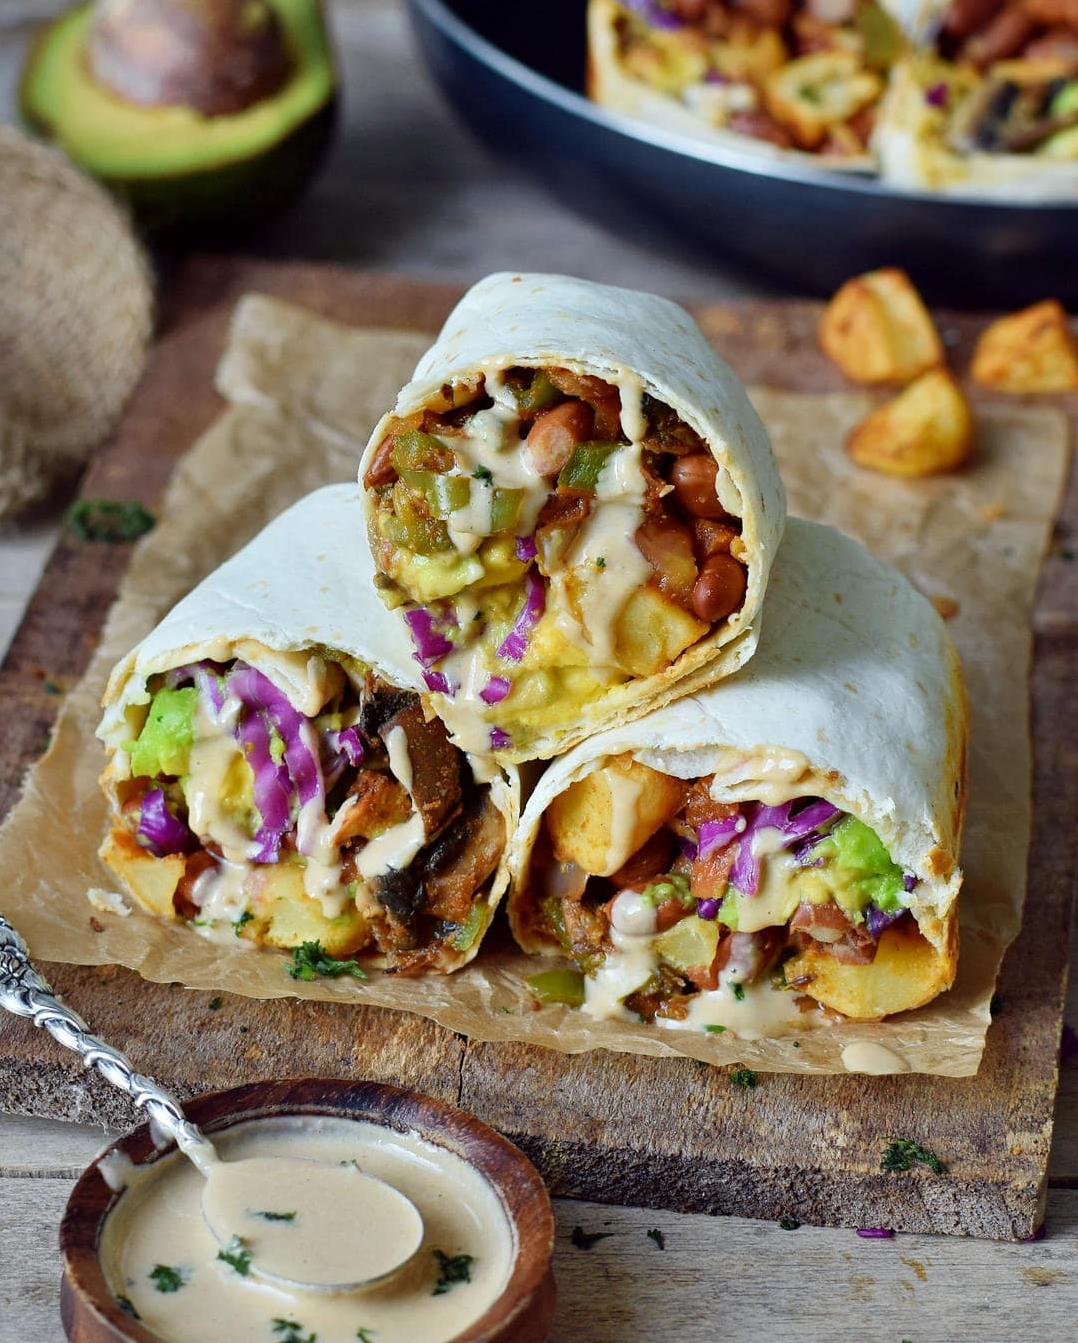  These gluten-free burritos are perfect for a quick and easy meal! 🍴